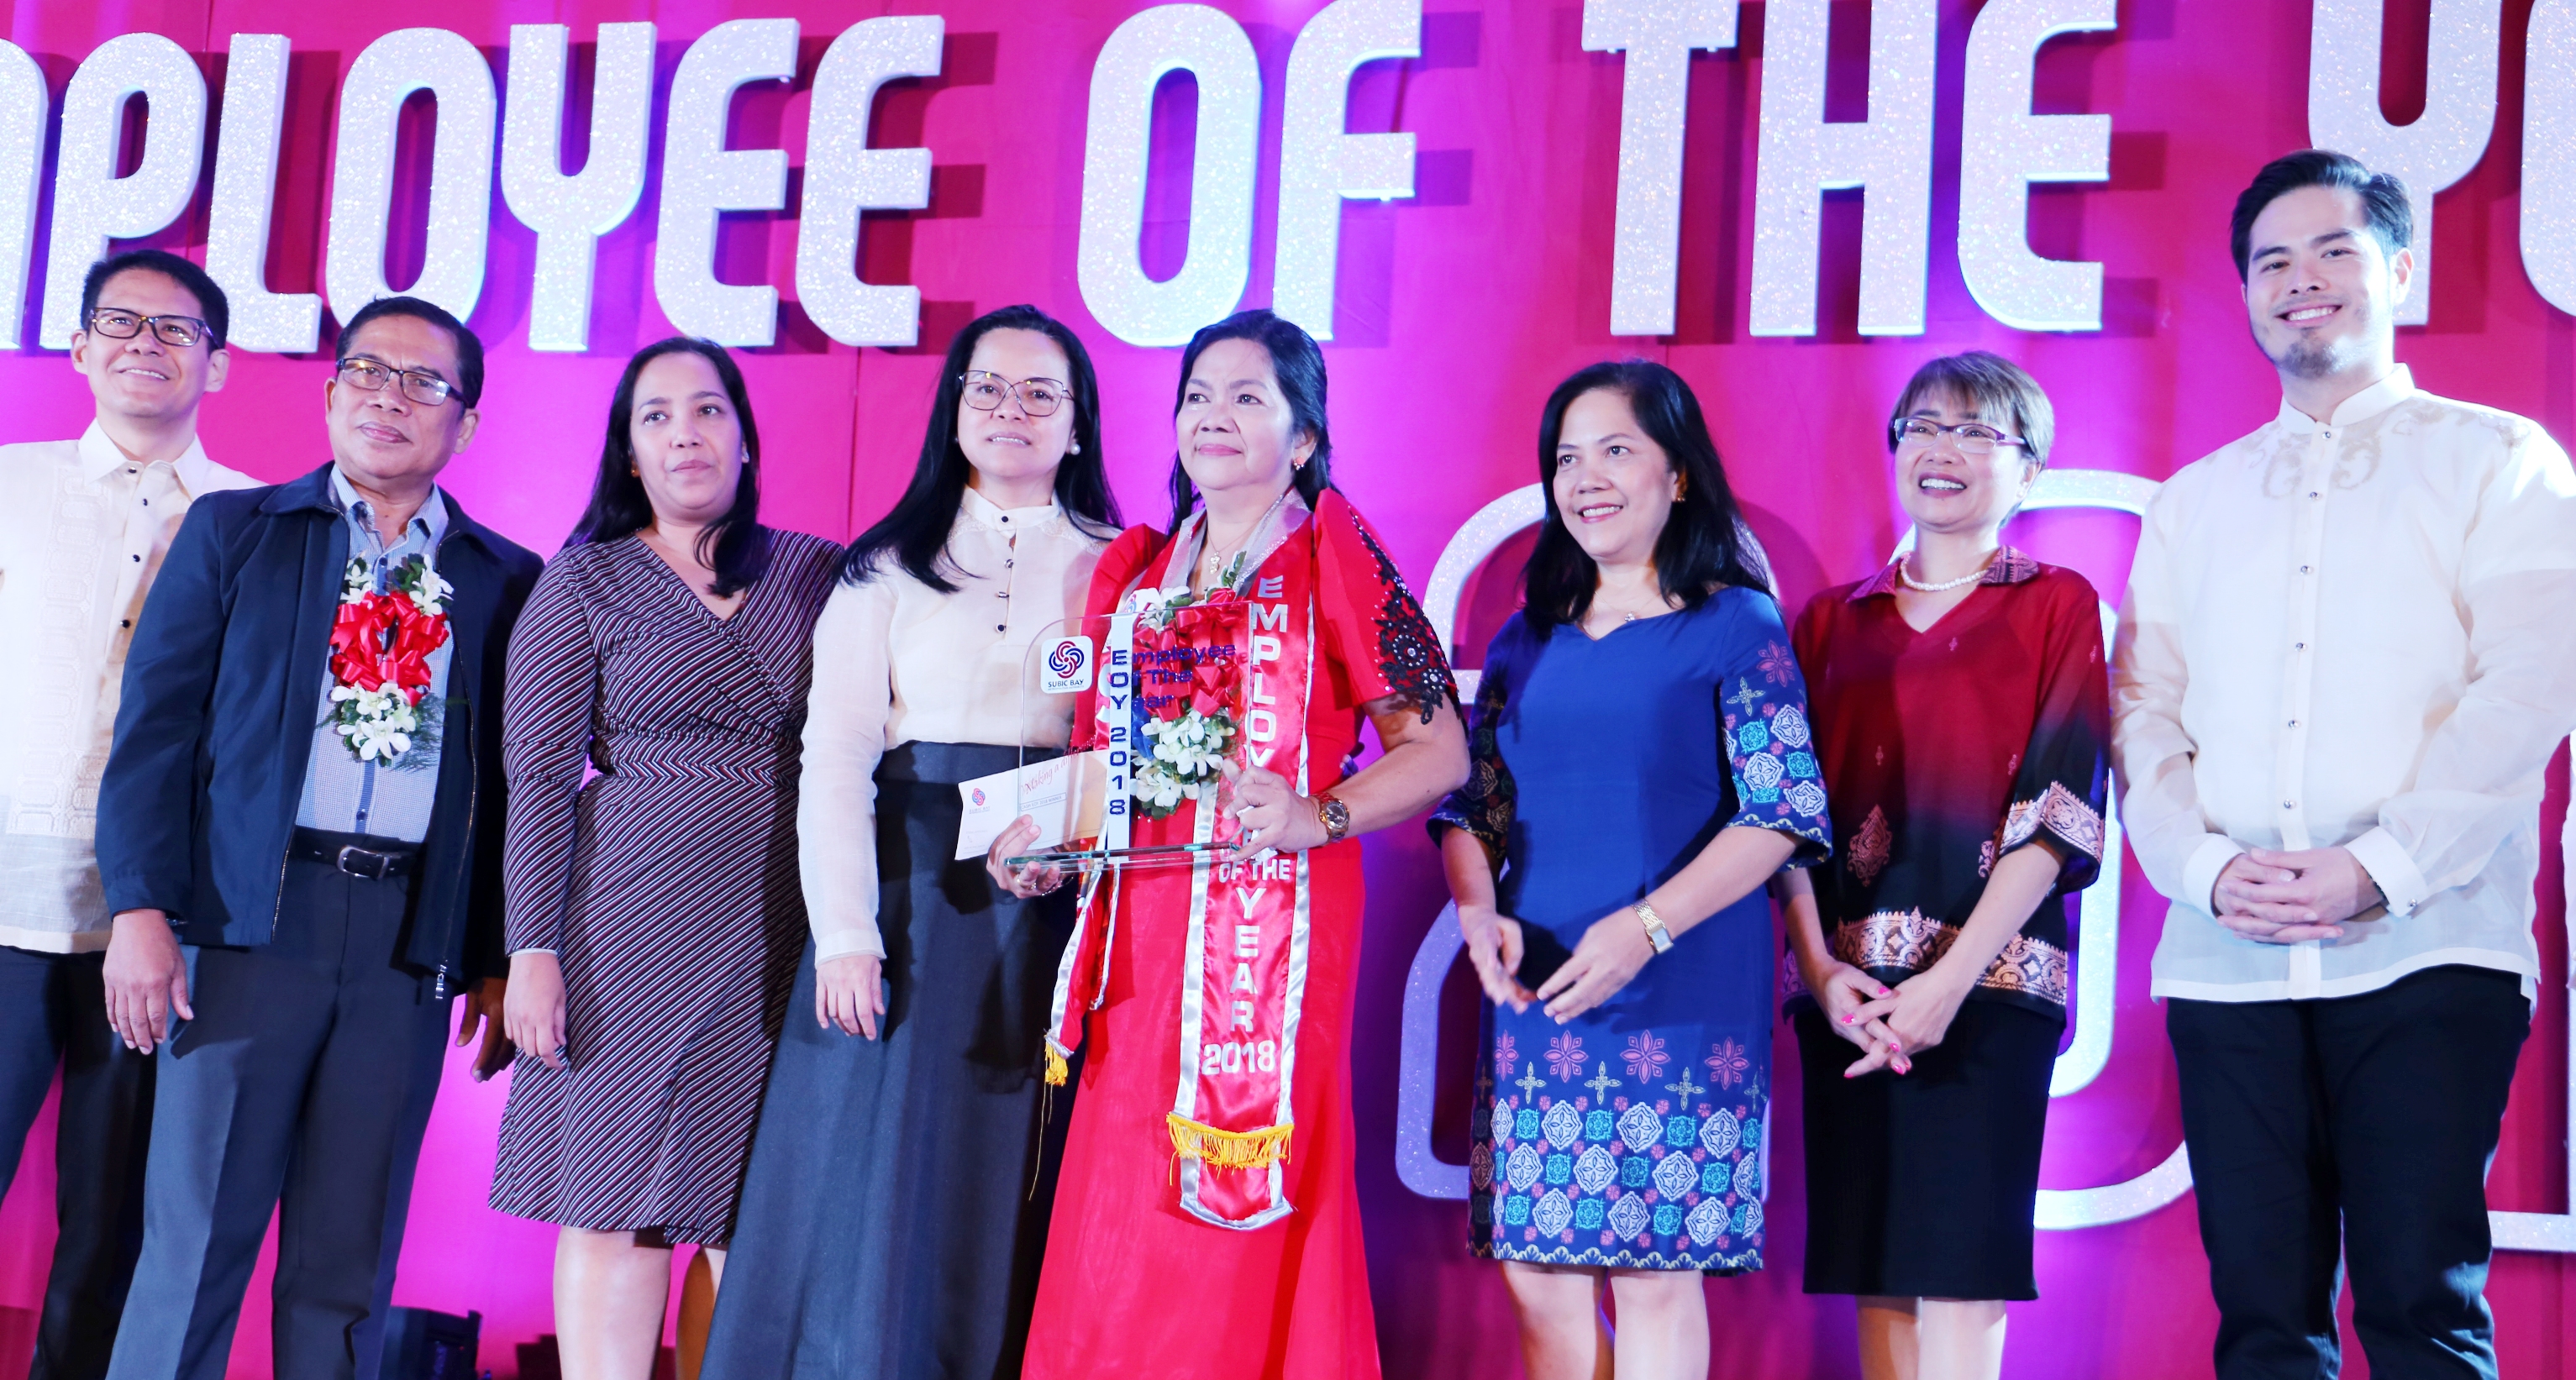 SBMA Chairman and Administrator Wilma T. Eisma (4 th  from left) congratulates SBMA 2018 Employee of the Year Nida Linda C. Rojo, along with (L-R) SBMA Senior Deputy Administrator (SDA) for Support Services Ramon Agregado, CSC-Zambales Dir. Jose Gea, SBMA tourism manager Jamelle Camba, SBMA Dir. Ma. Cecilia Bitare, SDA for Regulatory Amethya dela Llana, and SDA for Business and Investment Renato Lee.